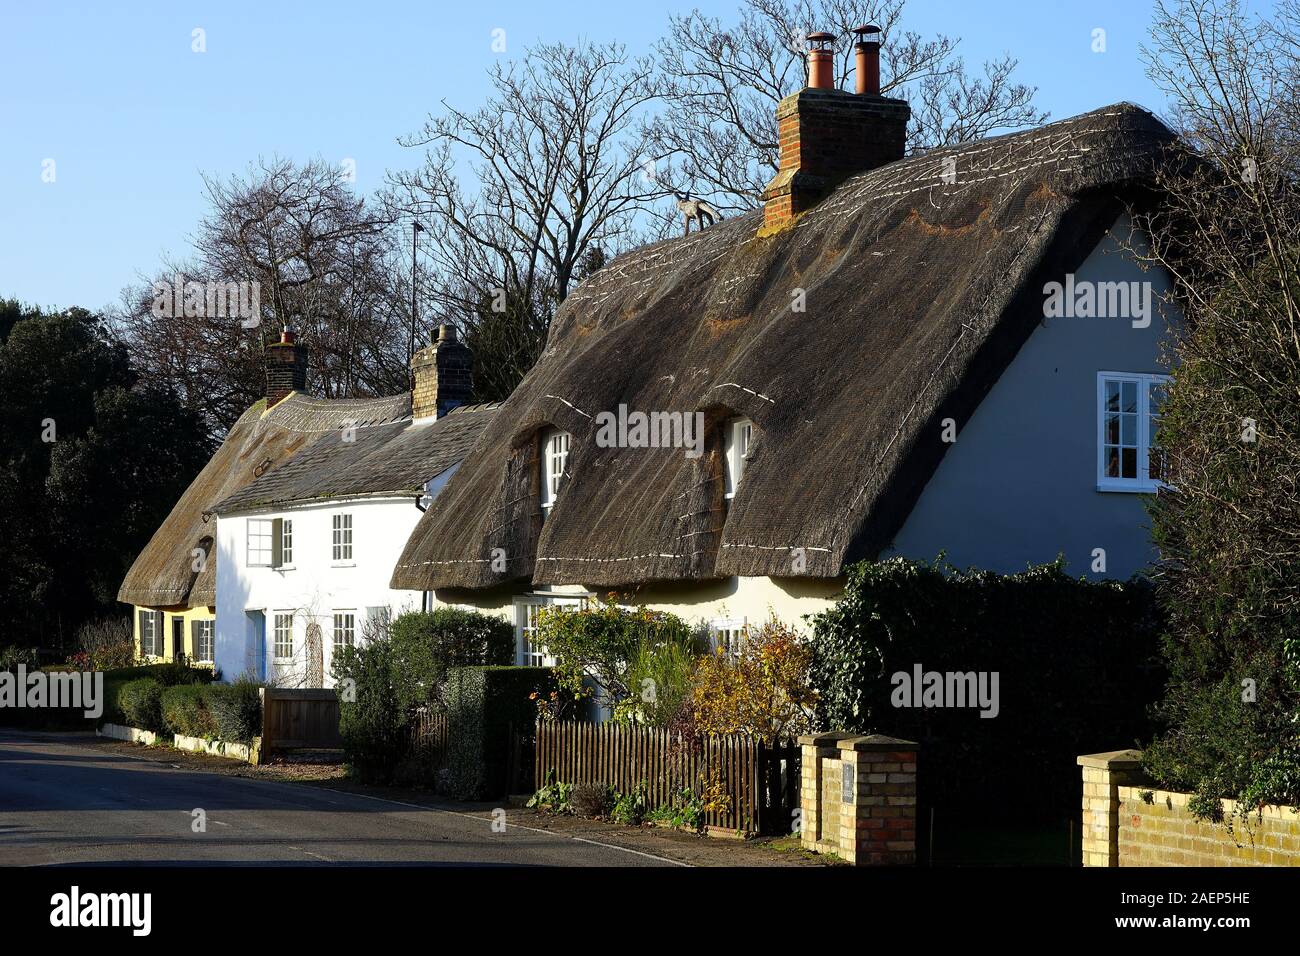 Attractive thatched cottages in the High Street at Foxton, Cambridgeshire Stock Photo